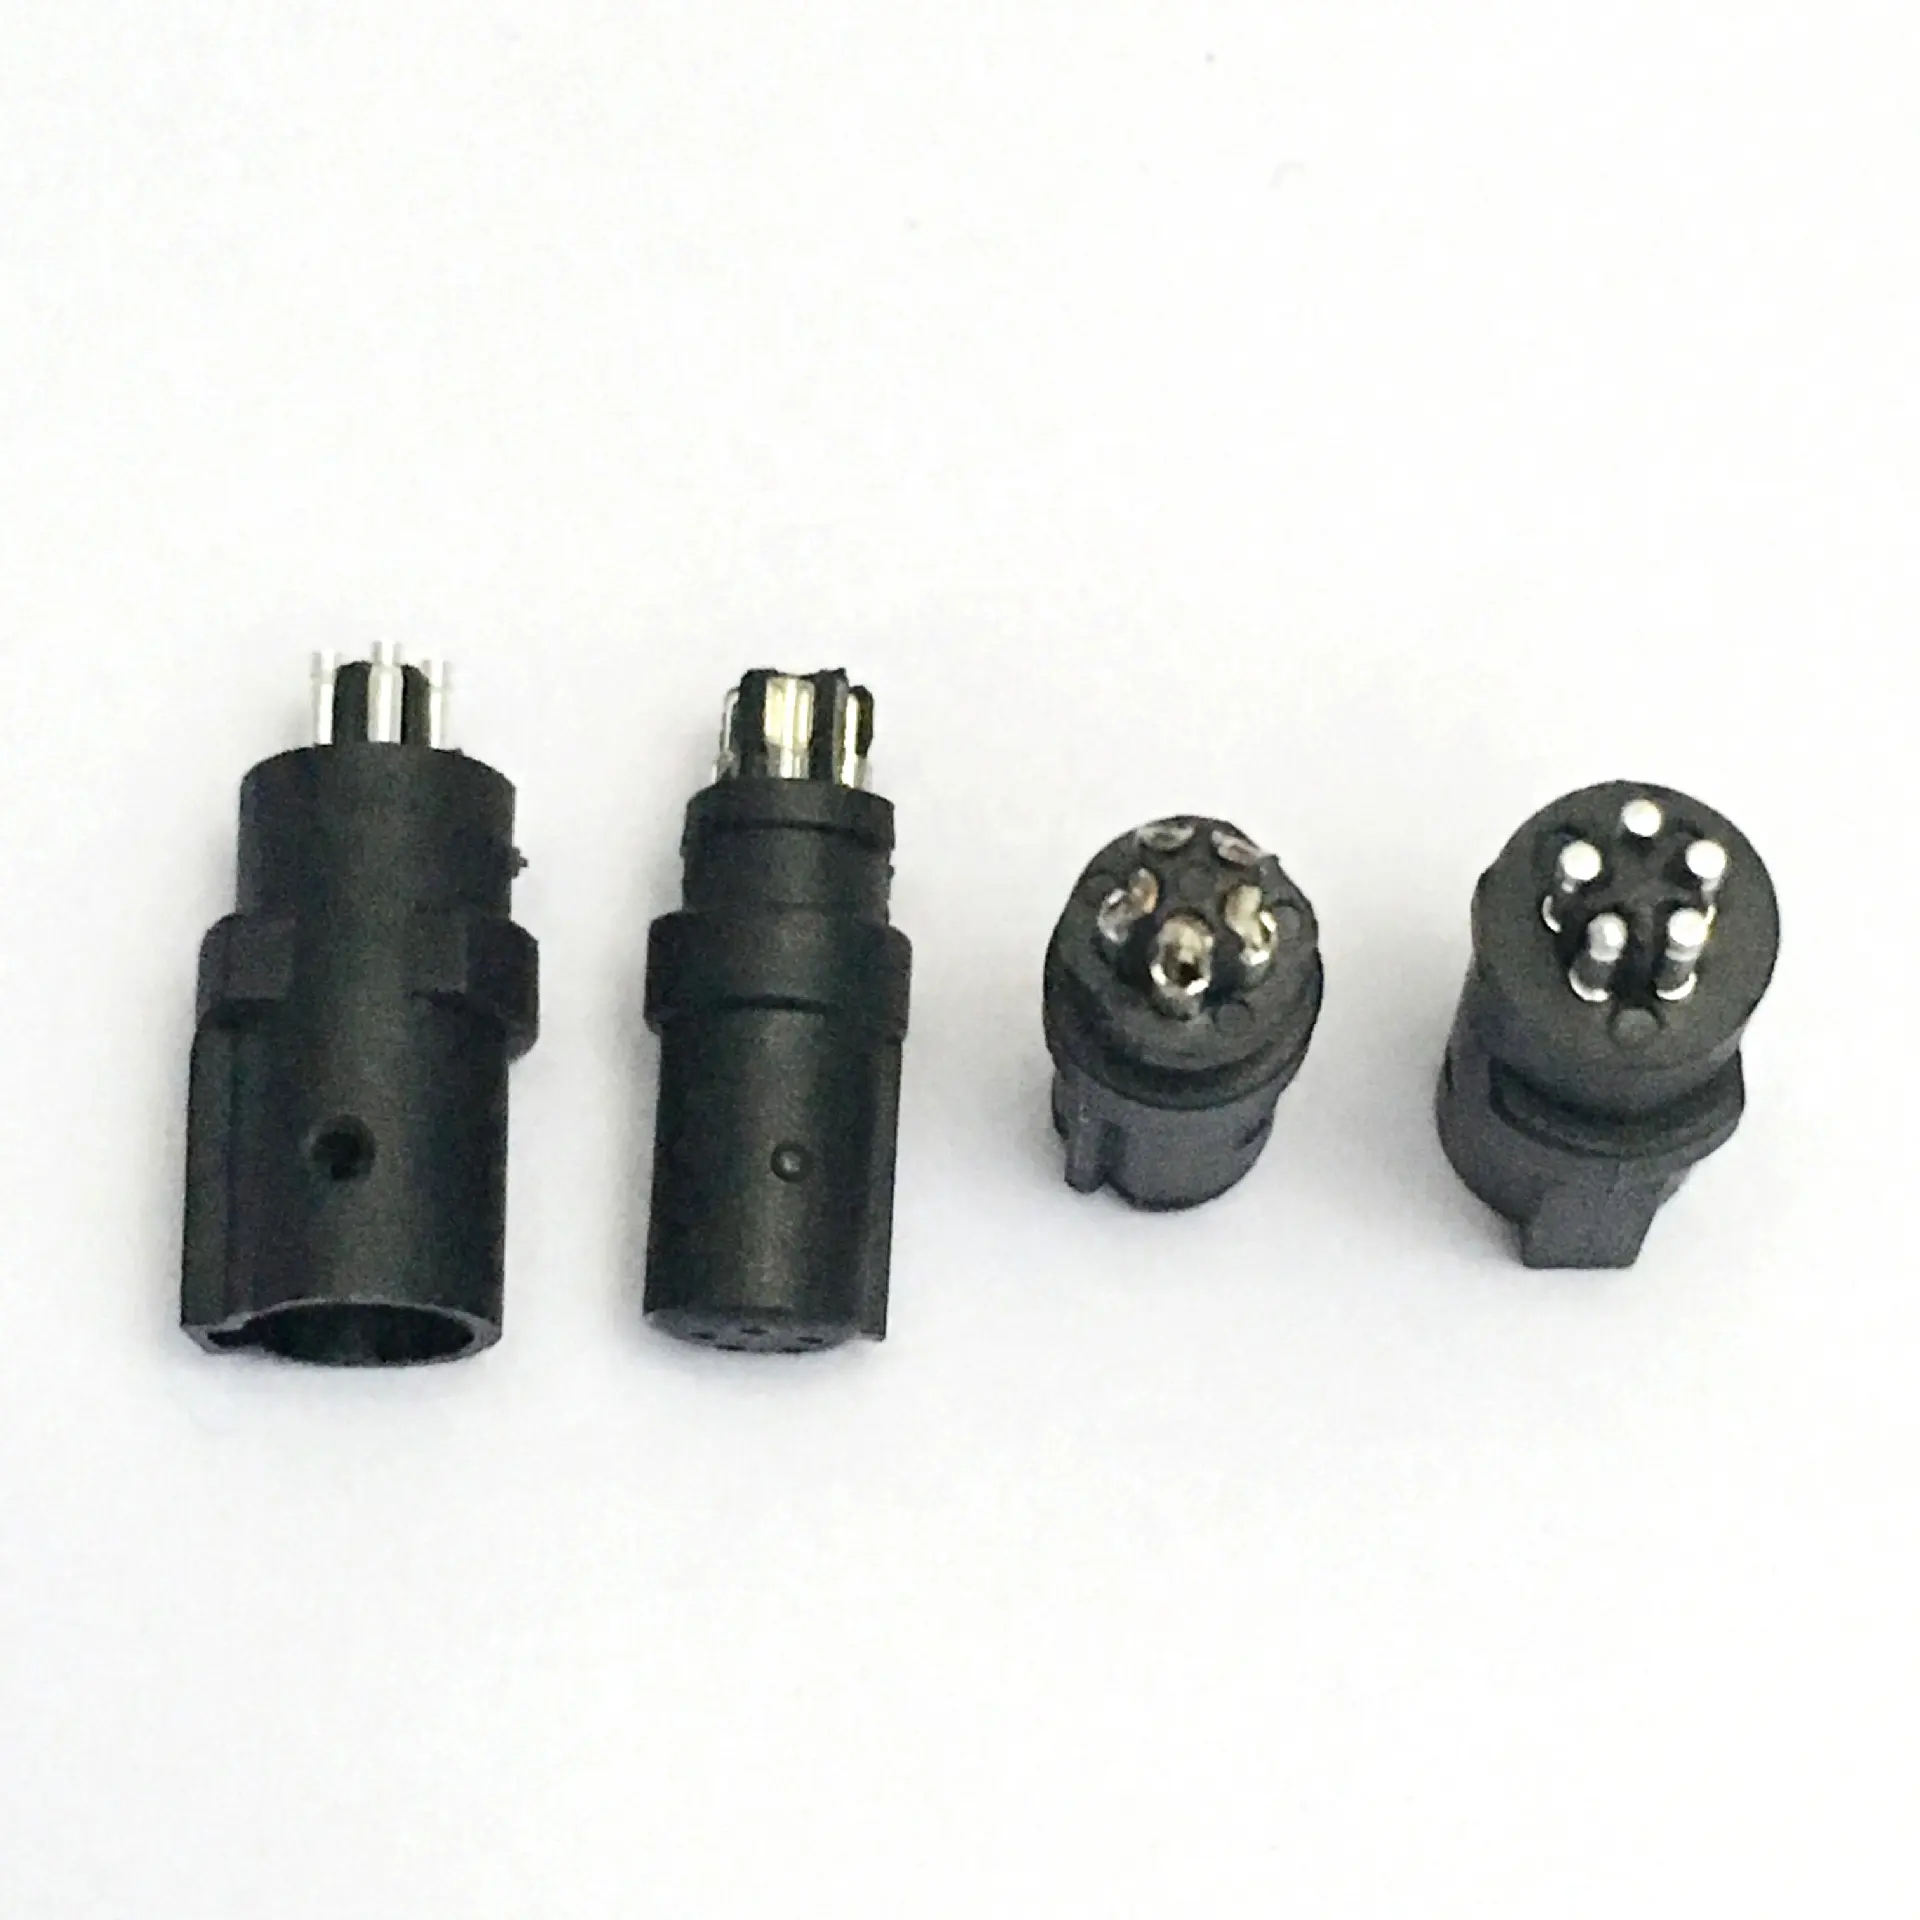 factory customized M8 cable connector m8 field connector 4pin 5 pin for monitoring system M8 waterproof c